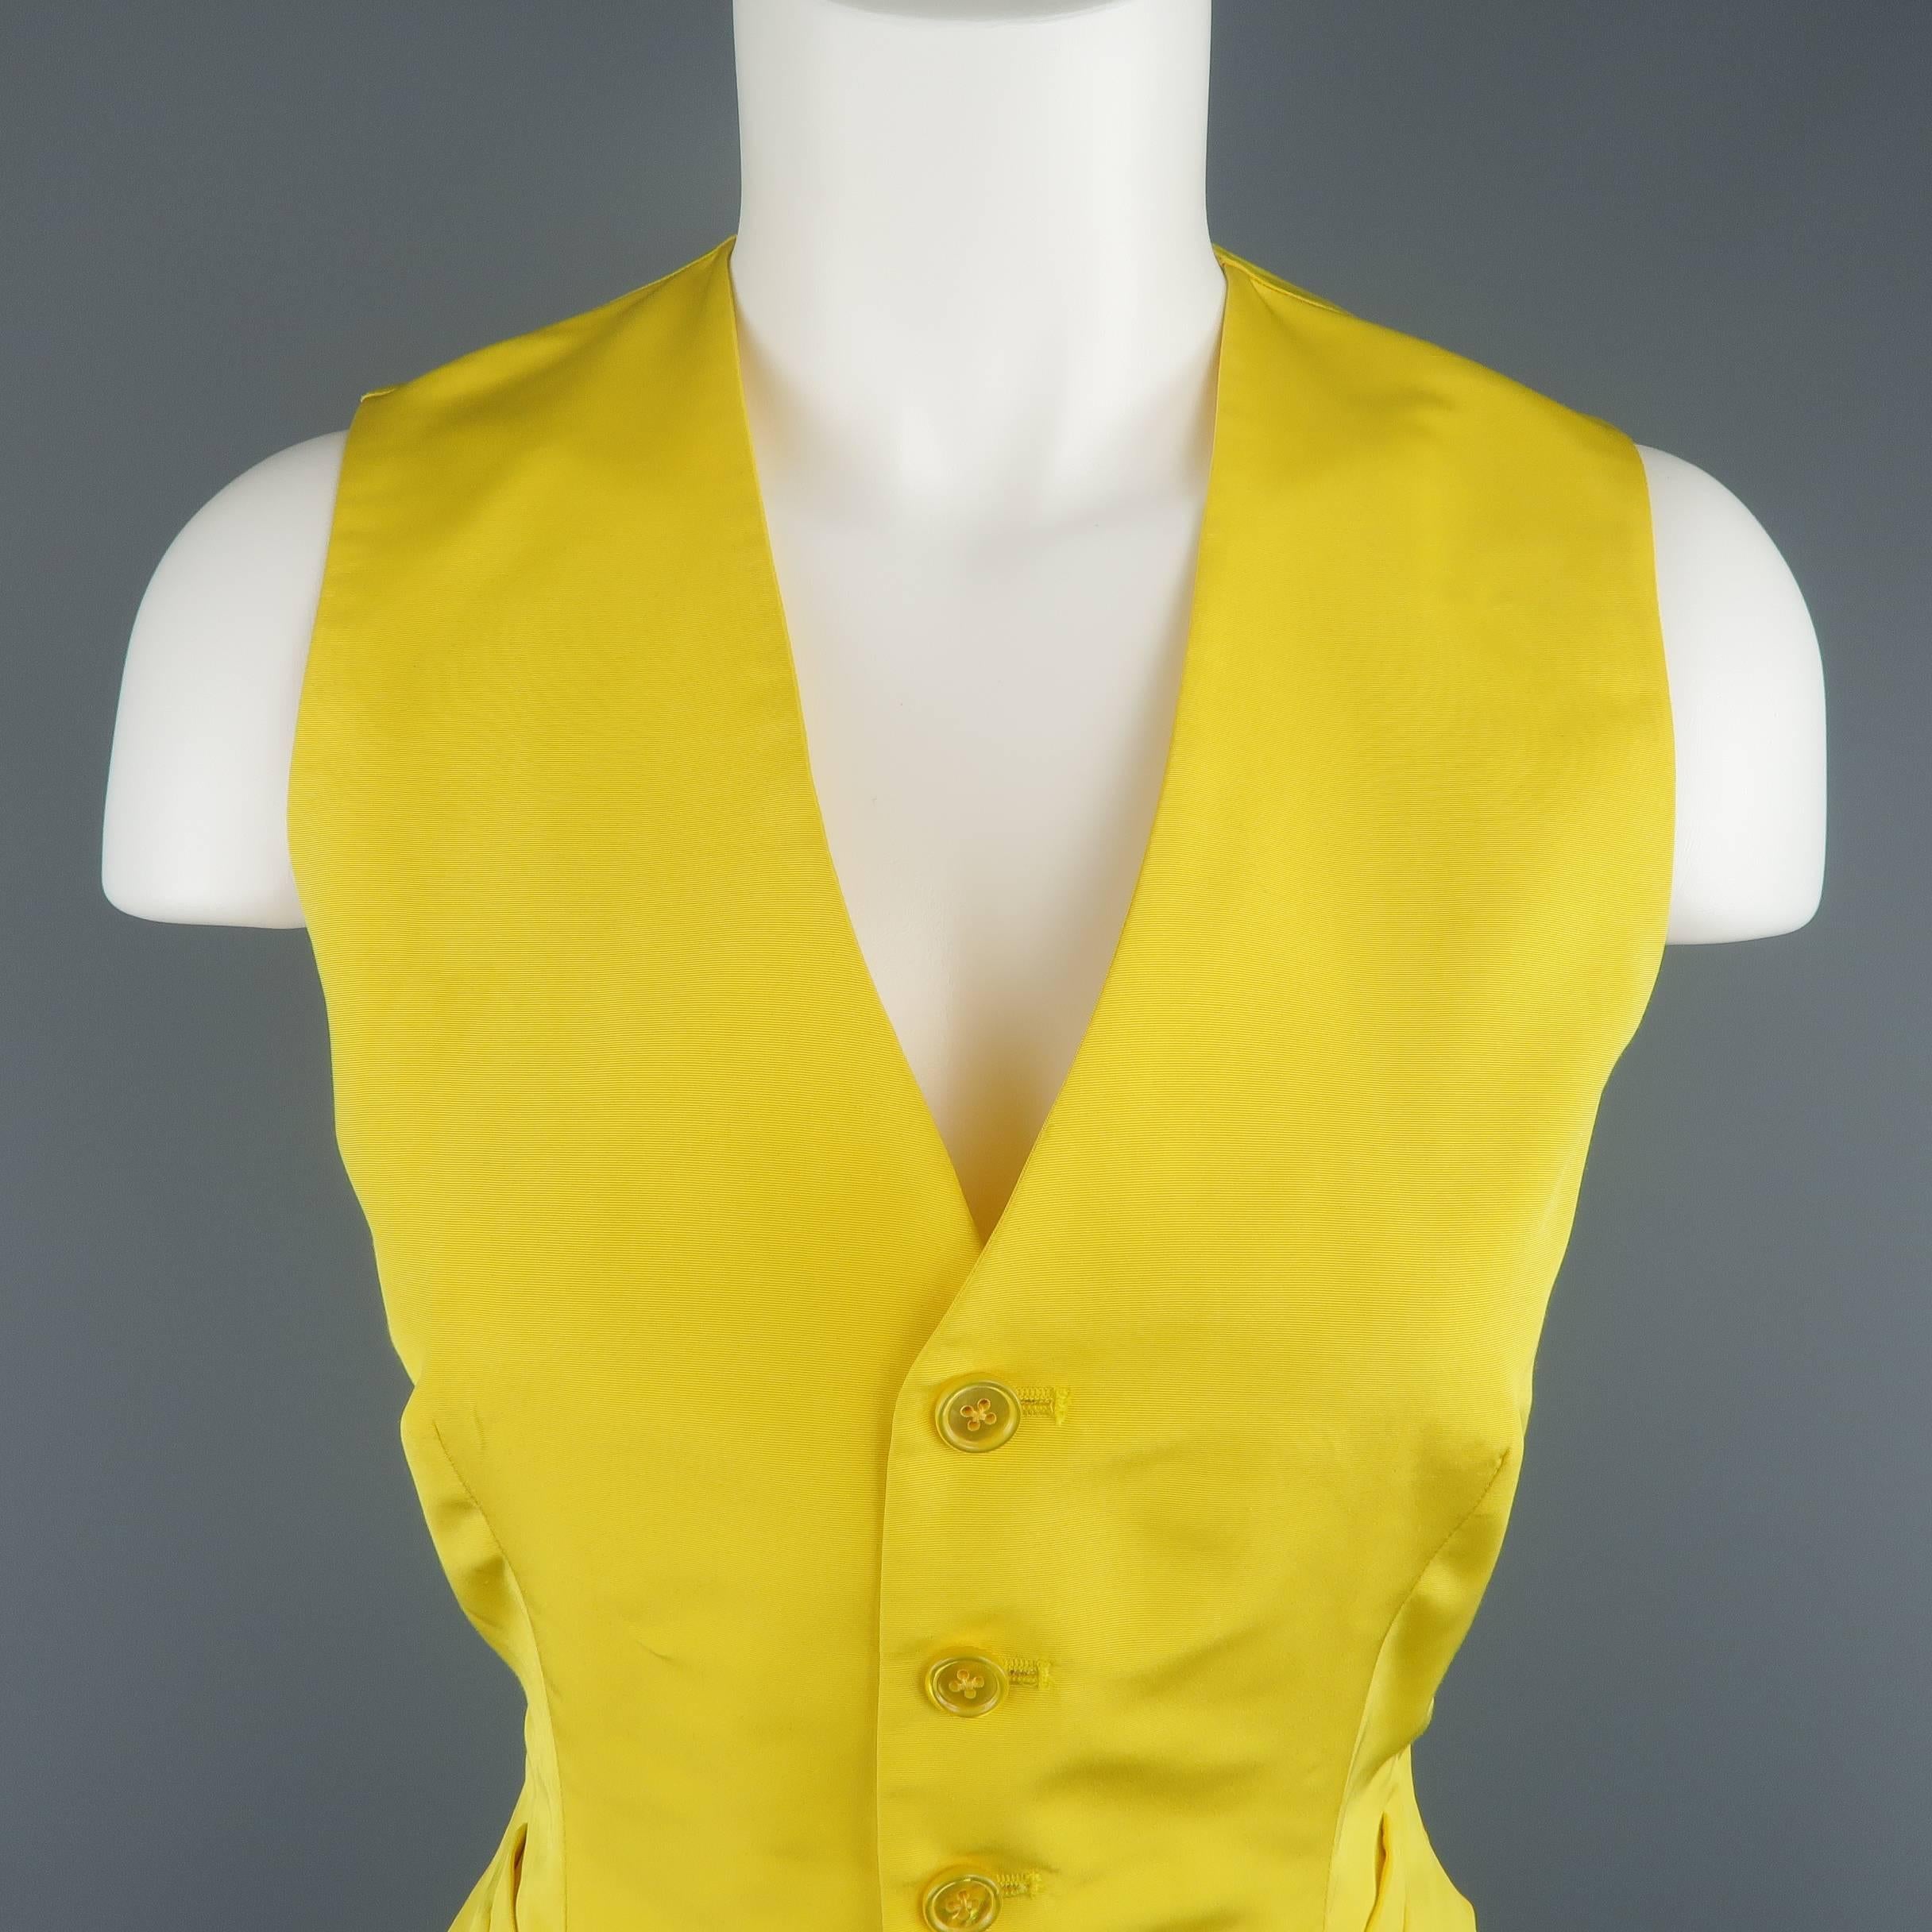 RALPH LAUREN COLLECTION dress vest comes in yellow silk twill with a light sheen and features a v neck line, five button front, and pleated back with belt. Made in USA.
 
Excellent Pre-Owned Condition.
Marked: 8
 
Measurements:
 
Shoulder: 12.5